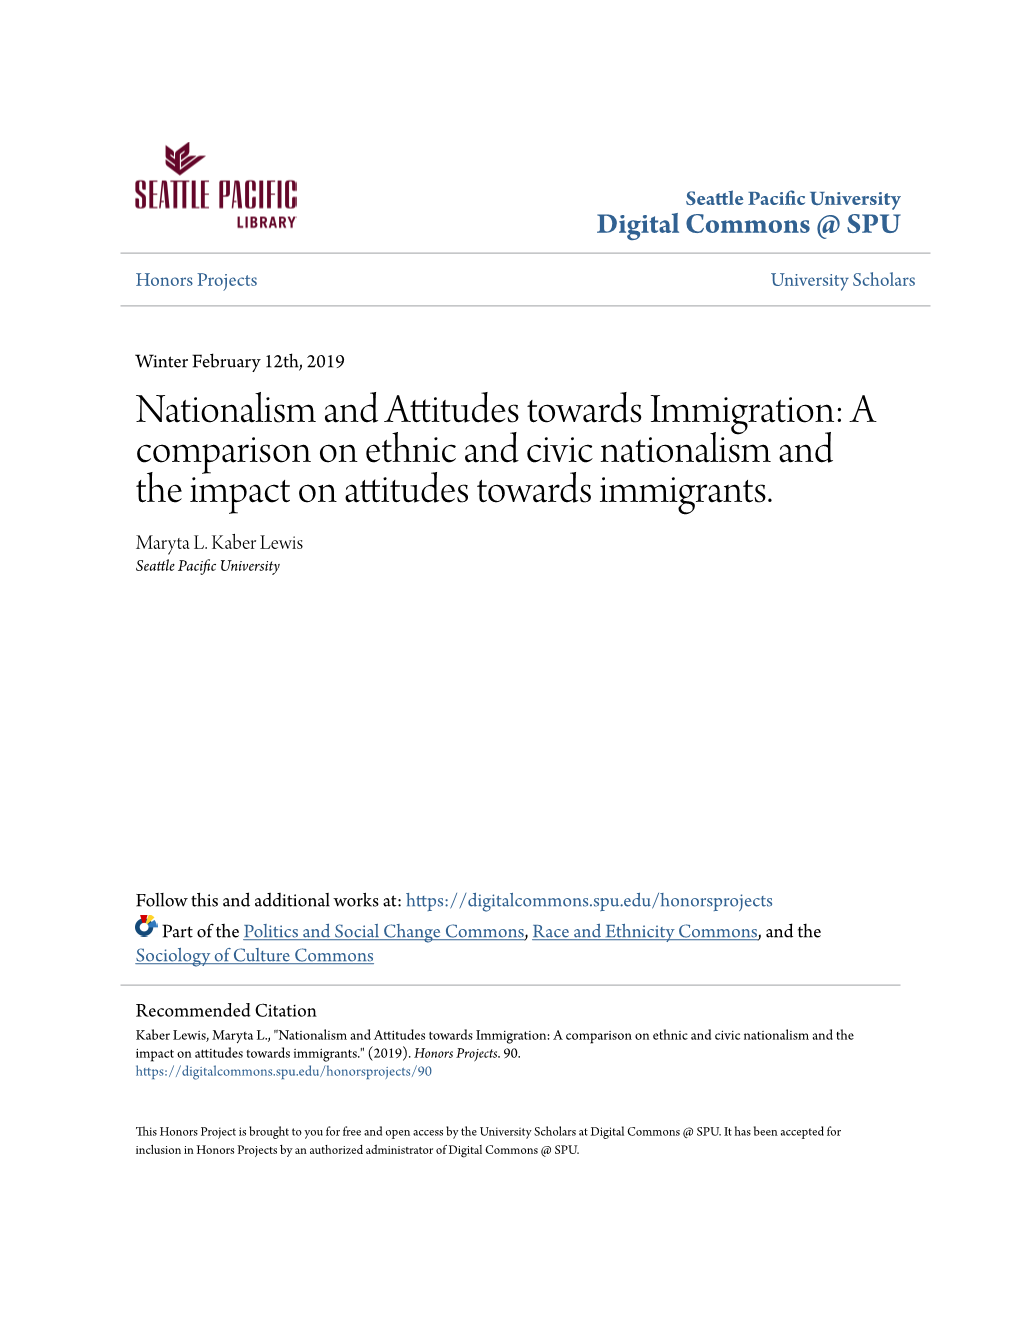 Nationalism and Attitudes Towards Immigration: a Comparison on Ethnic and Civic Nationalism and the Impact on Attitudes Towards Immigrants